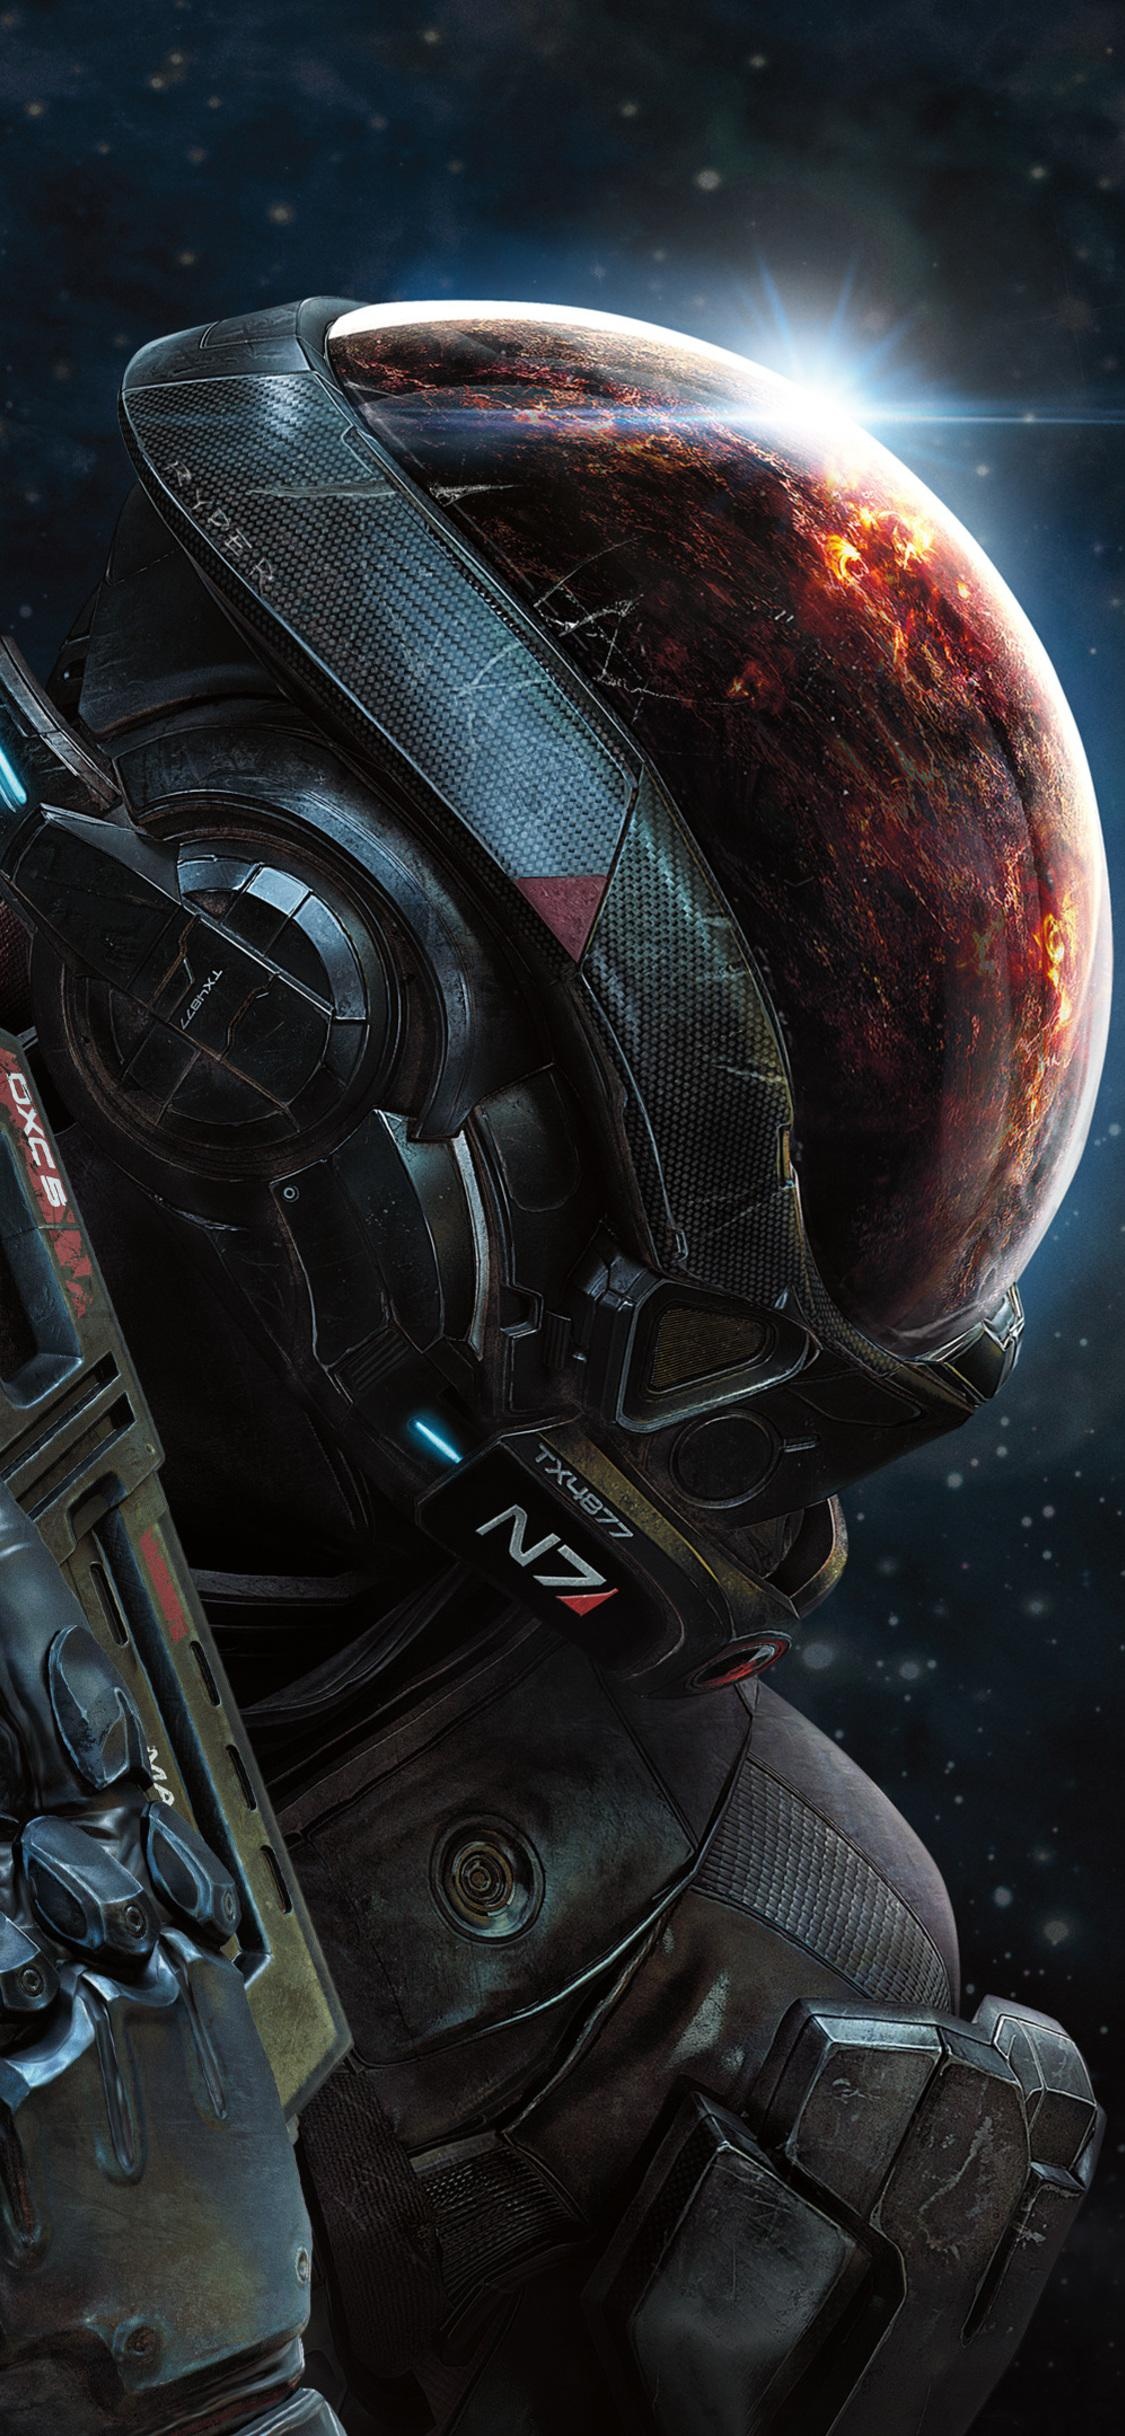 Mass Effect iPhone wallpapers, Gaming-themed wallpapers, High-quality images, Artistic designs, 1130x2440 HD Handy